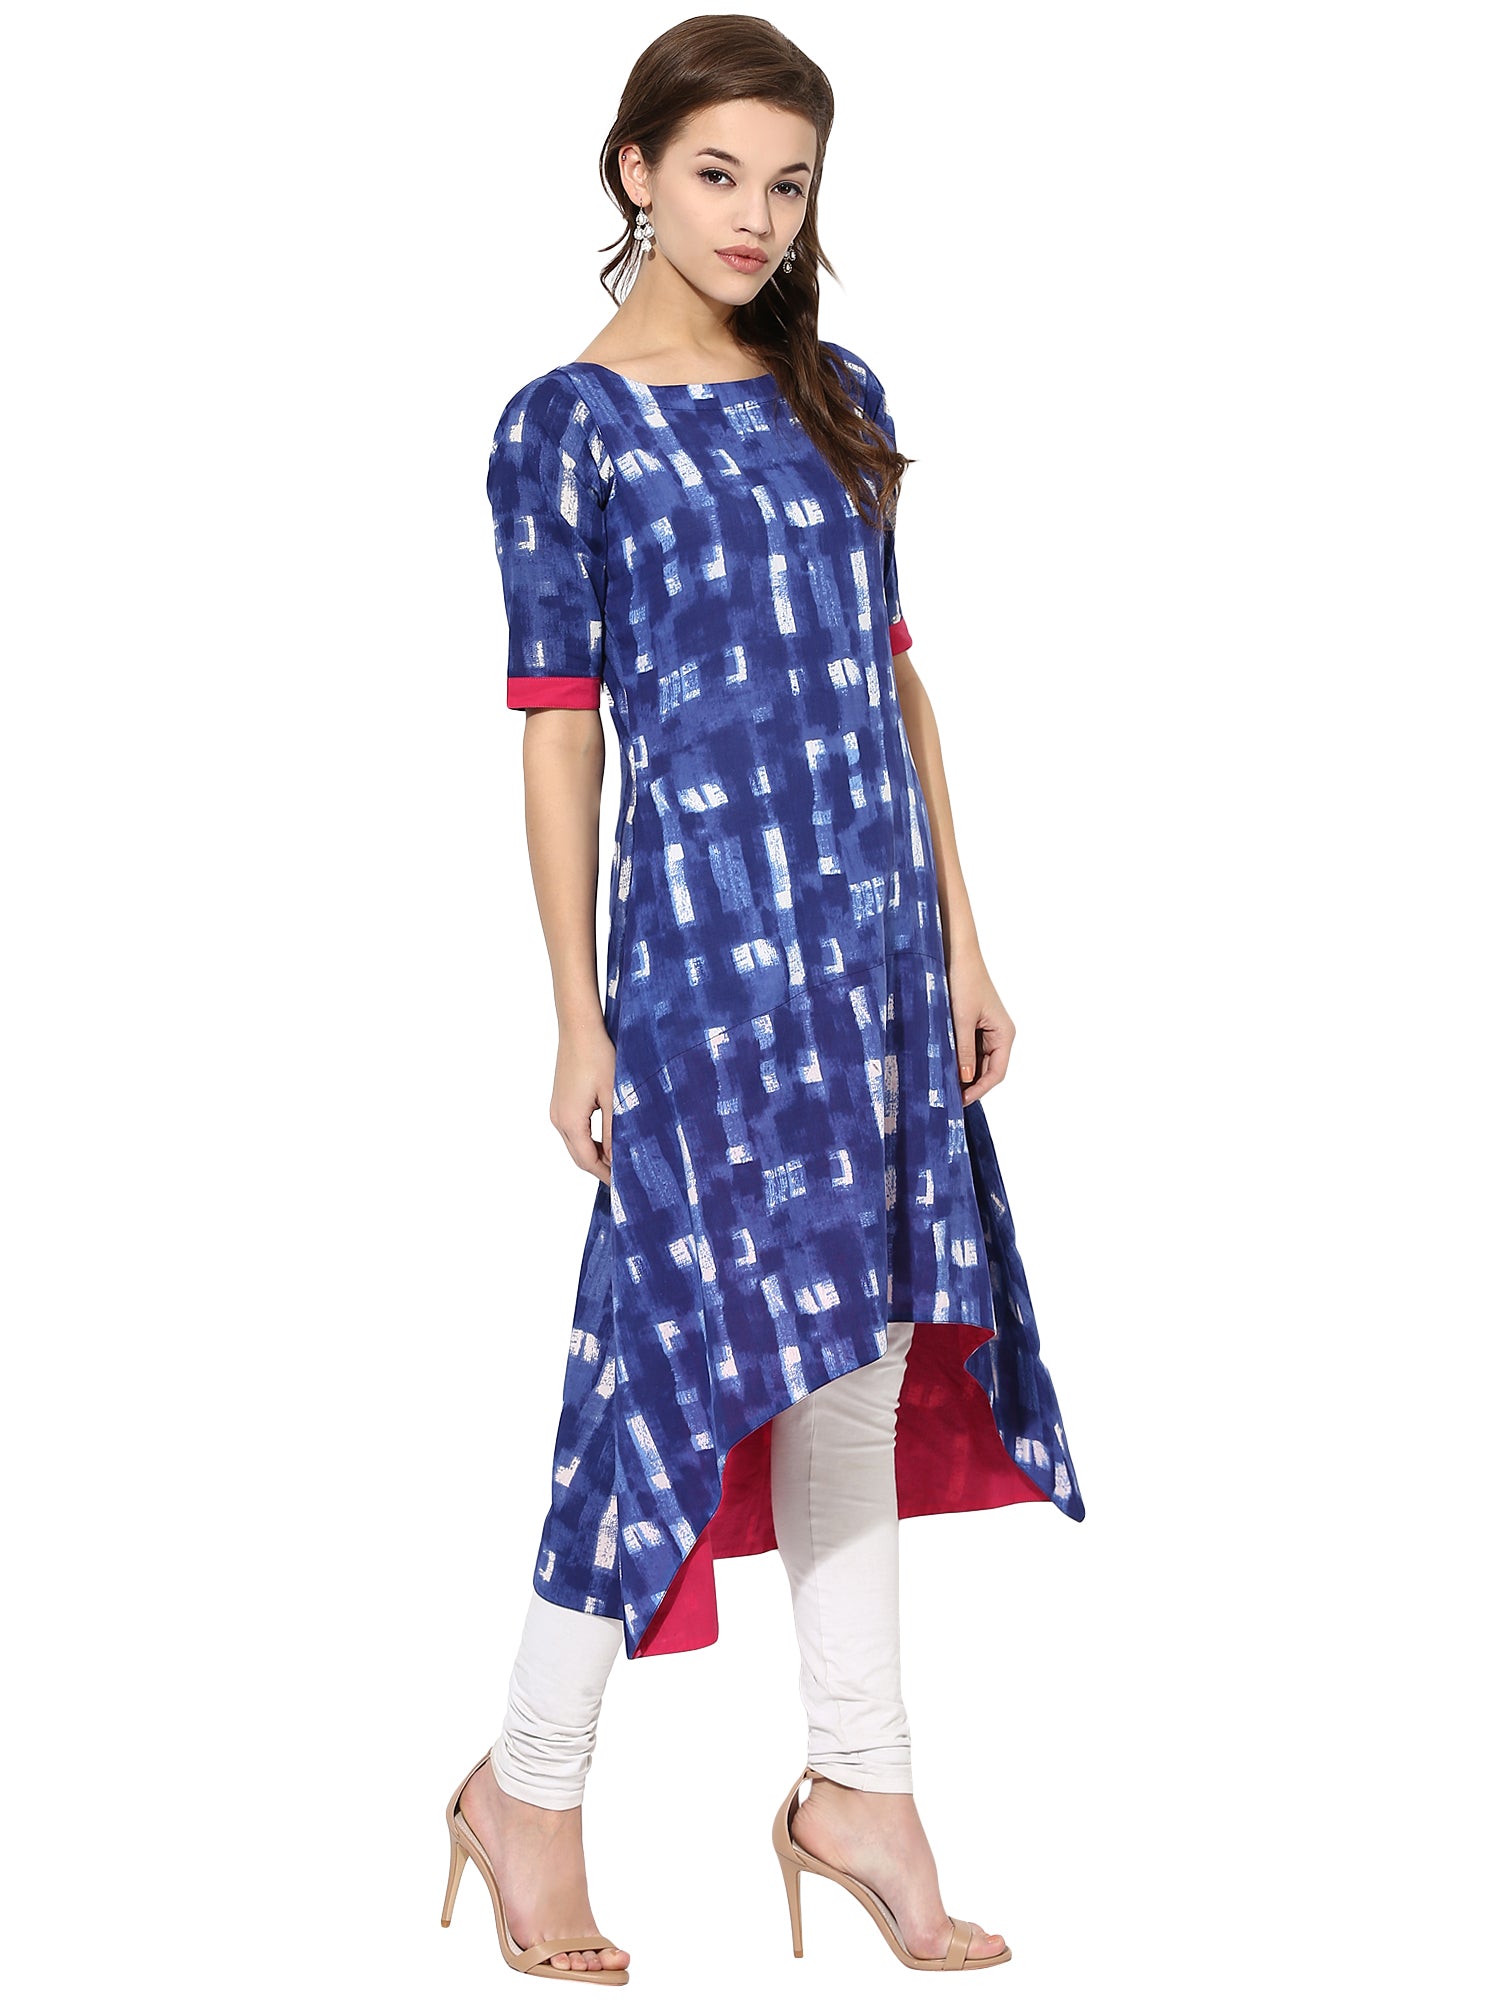 Women's Blue Color Short Sleeve And Boat Neck Cotton Only Kurti - Ahalyaa